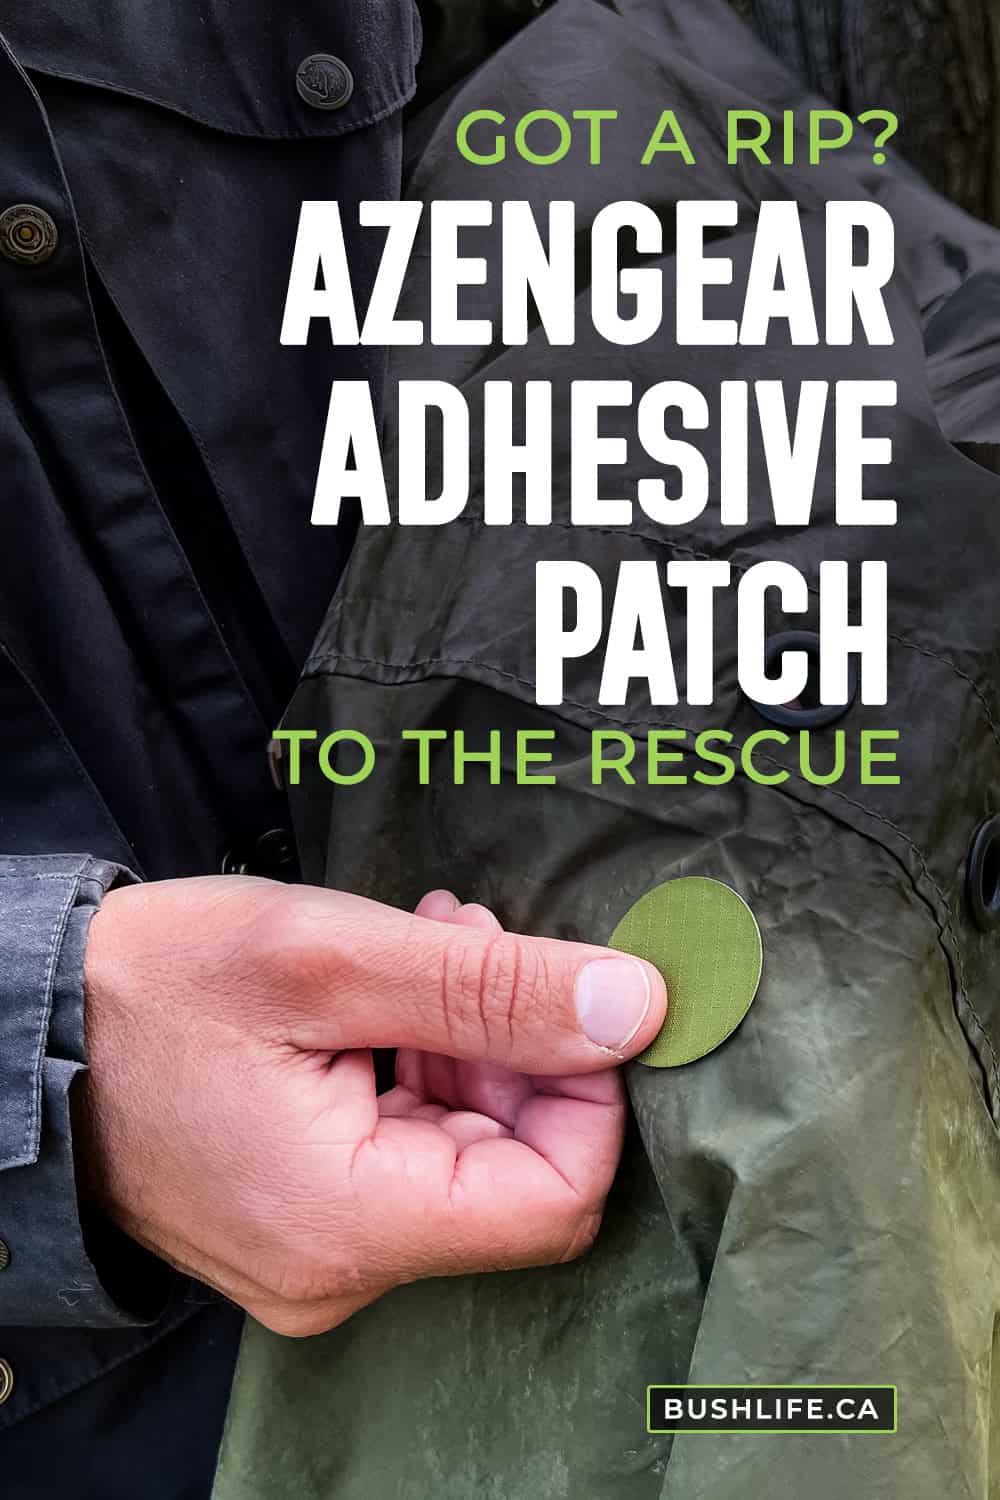 Using an olive aZengear adhesive patch to repair a tarp